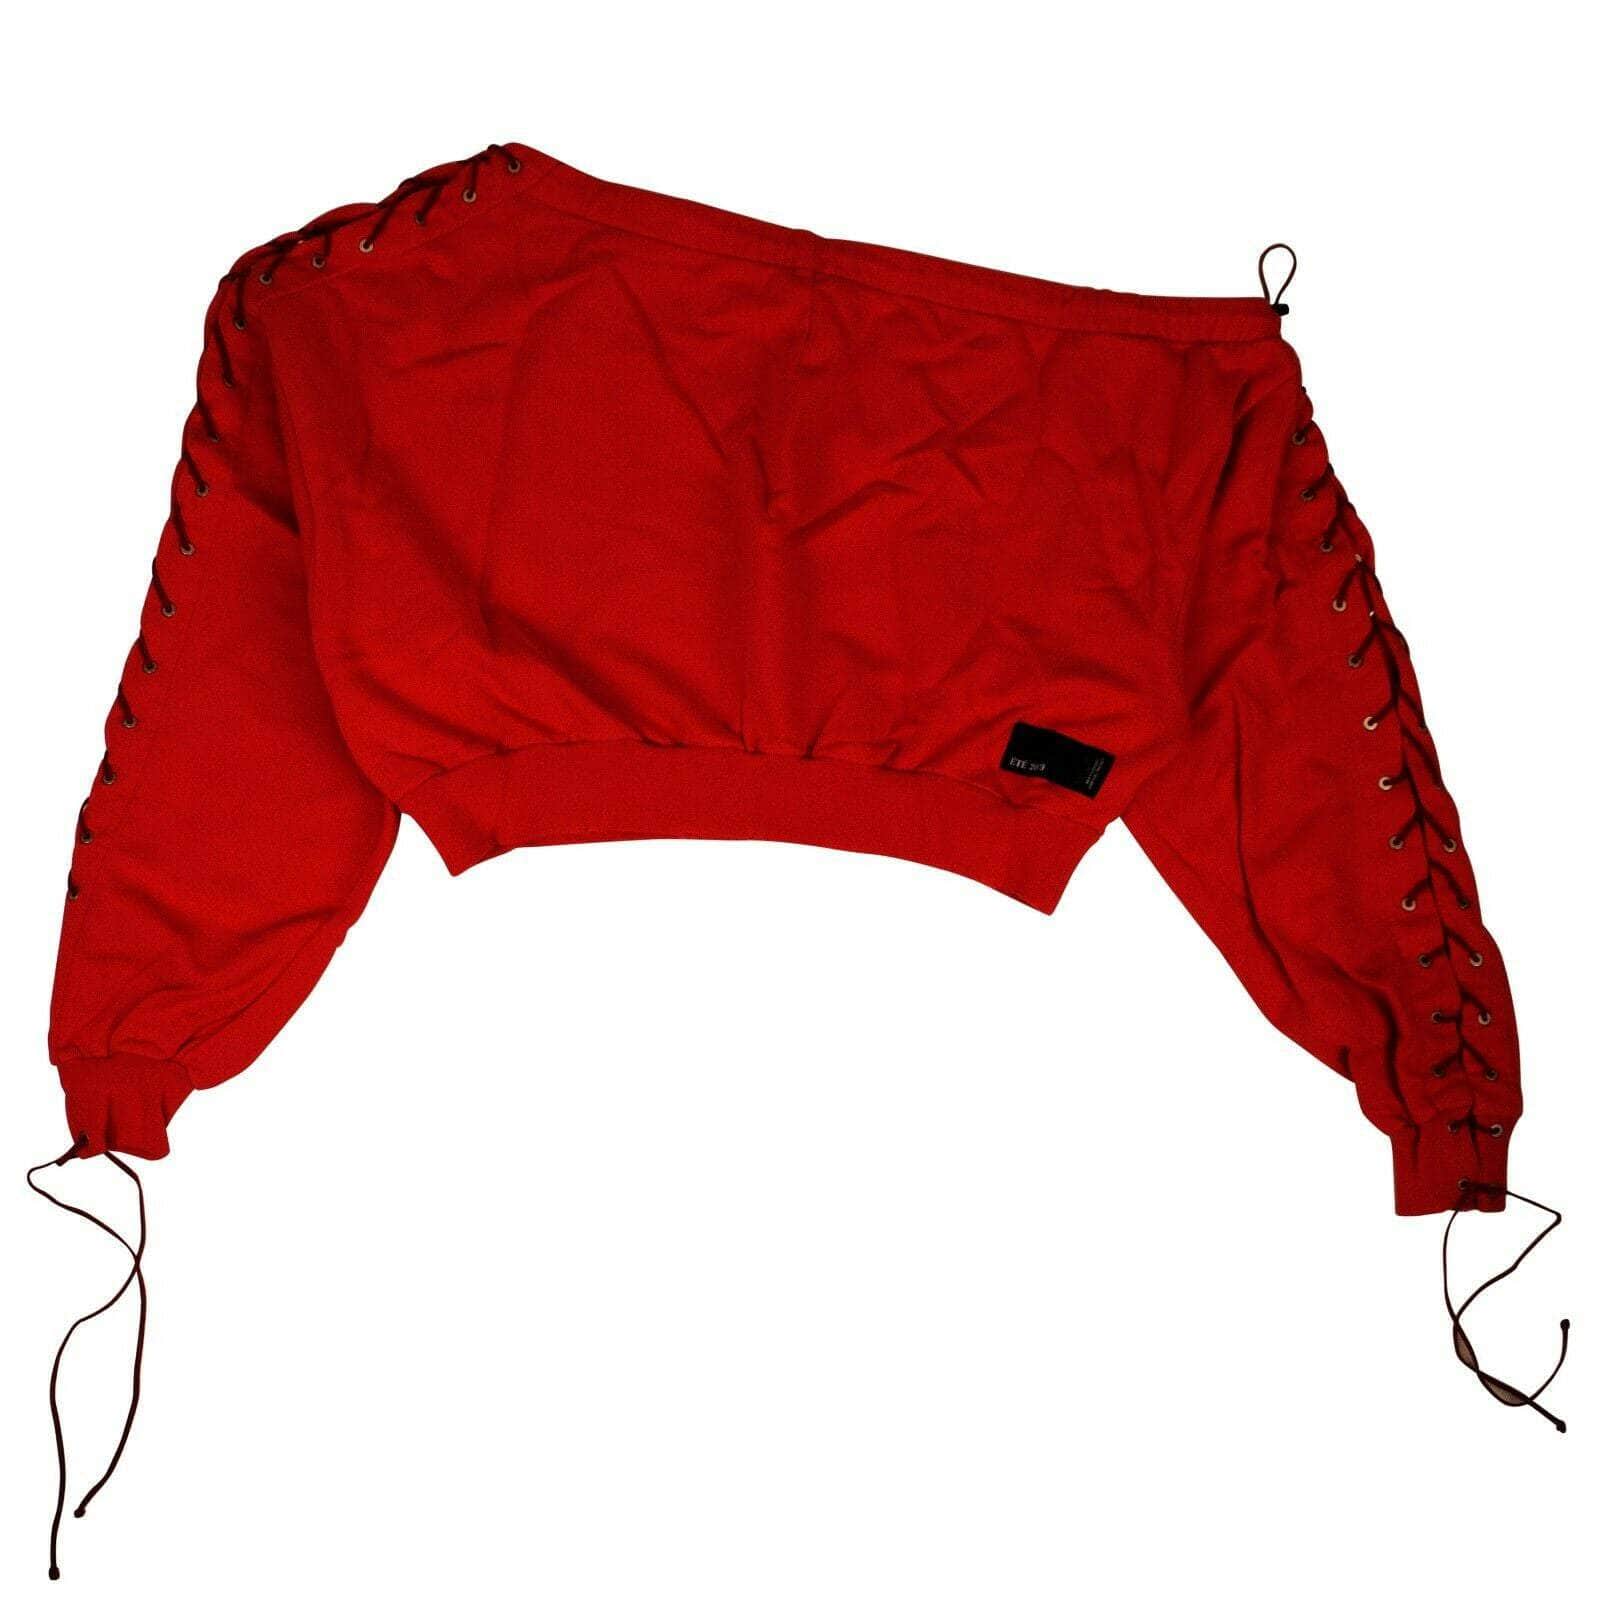 Unravel Project channelenable-all, chicmi, couponcollection, gender-womens, main-clothing, size-l, size-s, size-xs, size-xxs, under-250, unravel-project, womens-hoodies-sweatshirts Red Off The Shoulder Sweatshirt